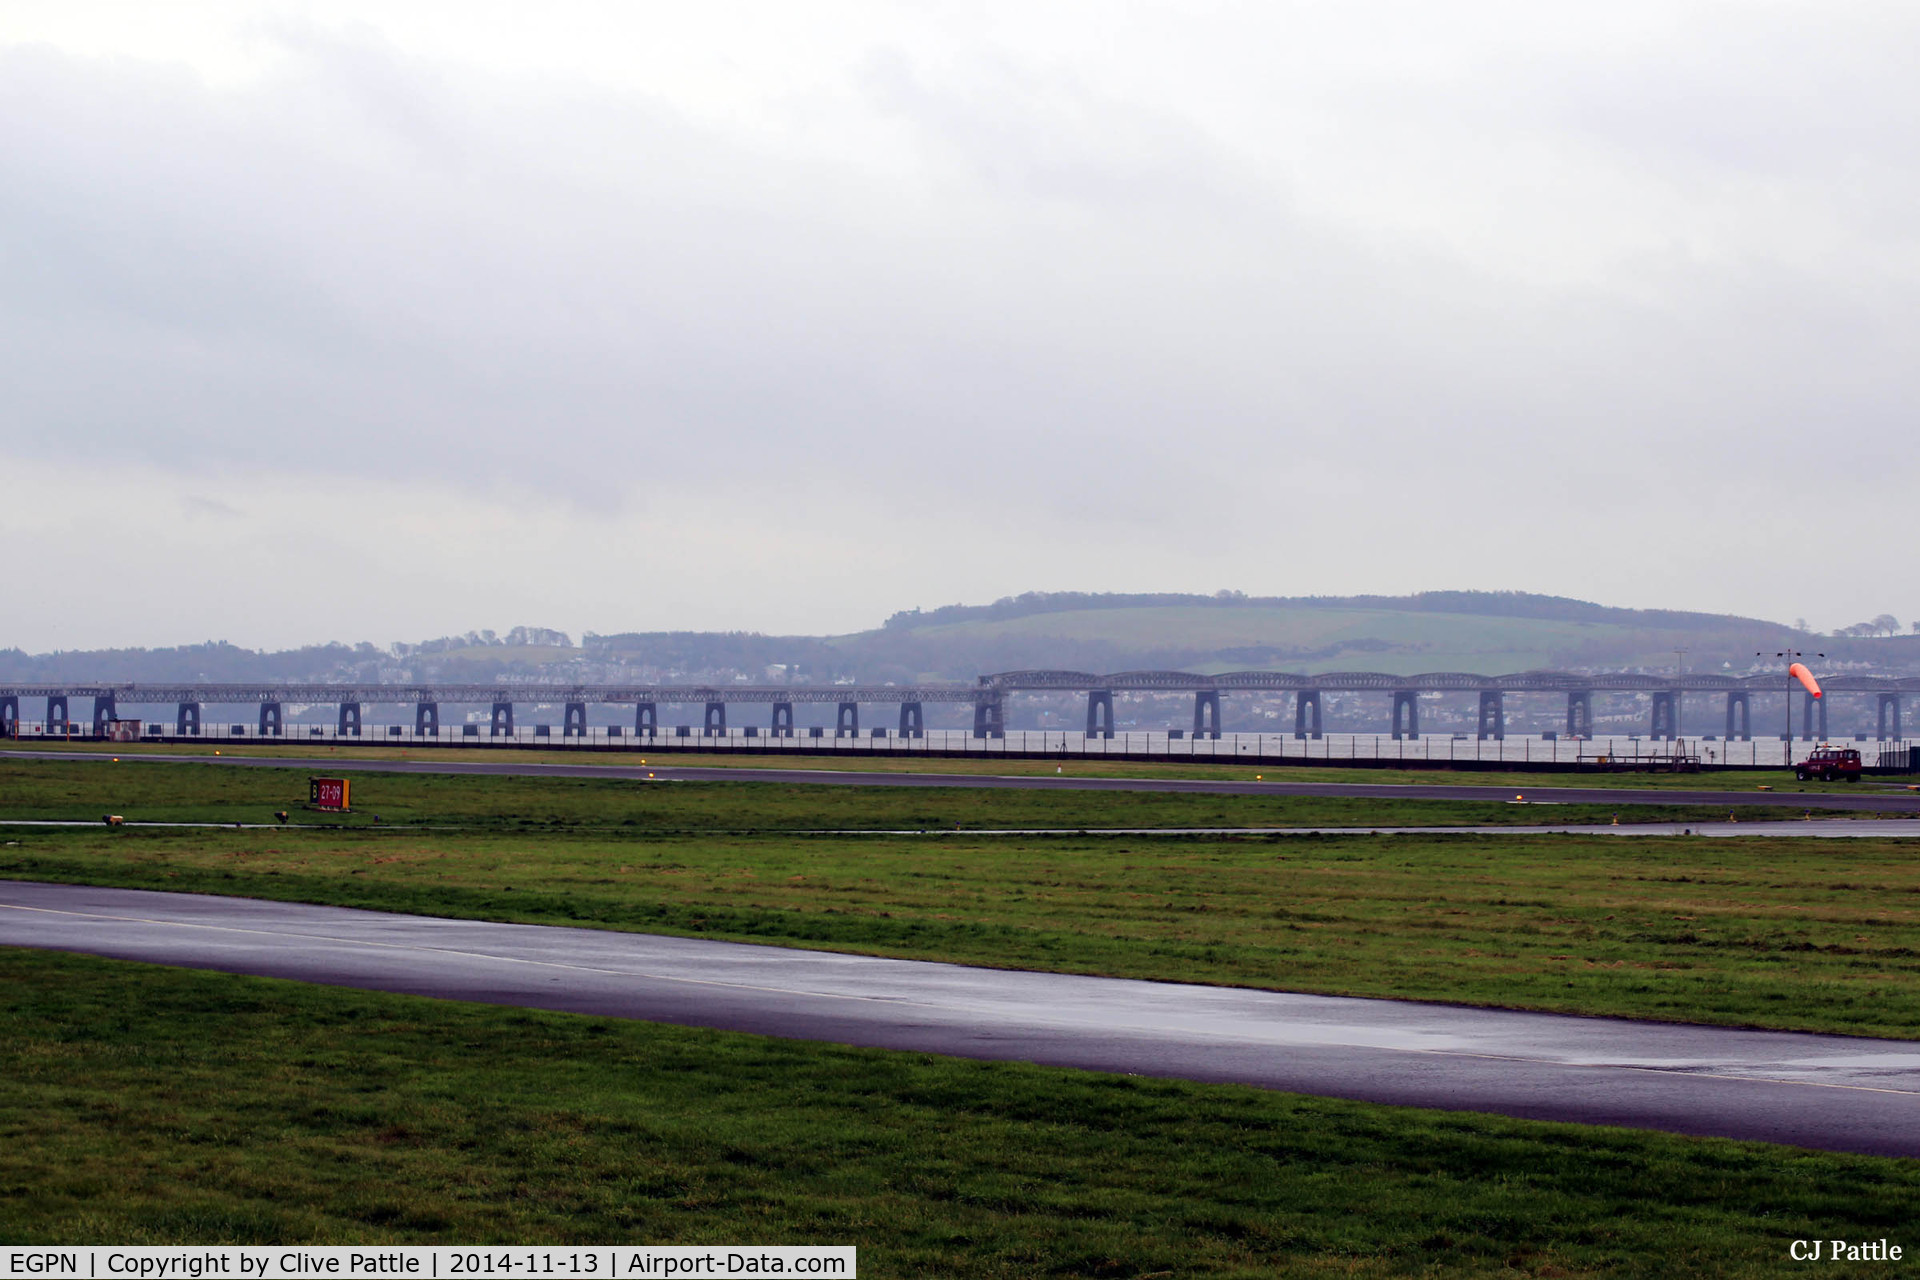 Dundee Airport, Dundee, Scotland United Kingdom (EGPN) - Uncluttered view looking south east across the airfield at Dundee Riverside, towards the Tay Rail Bridge and the Kingdom of Fife beyond.